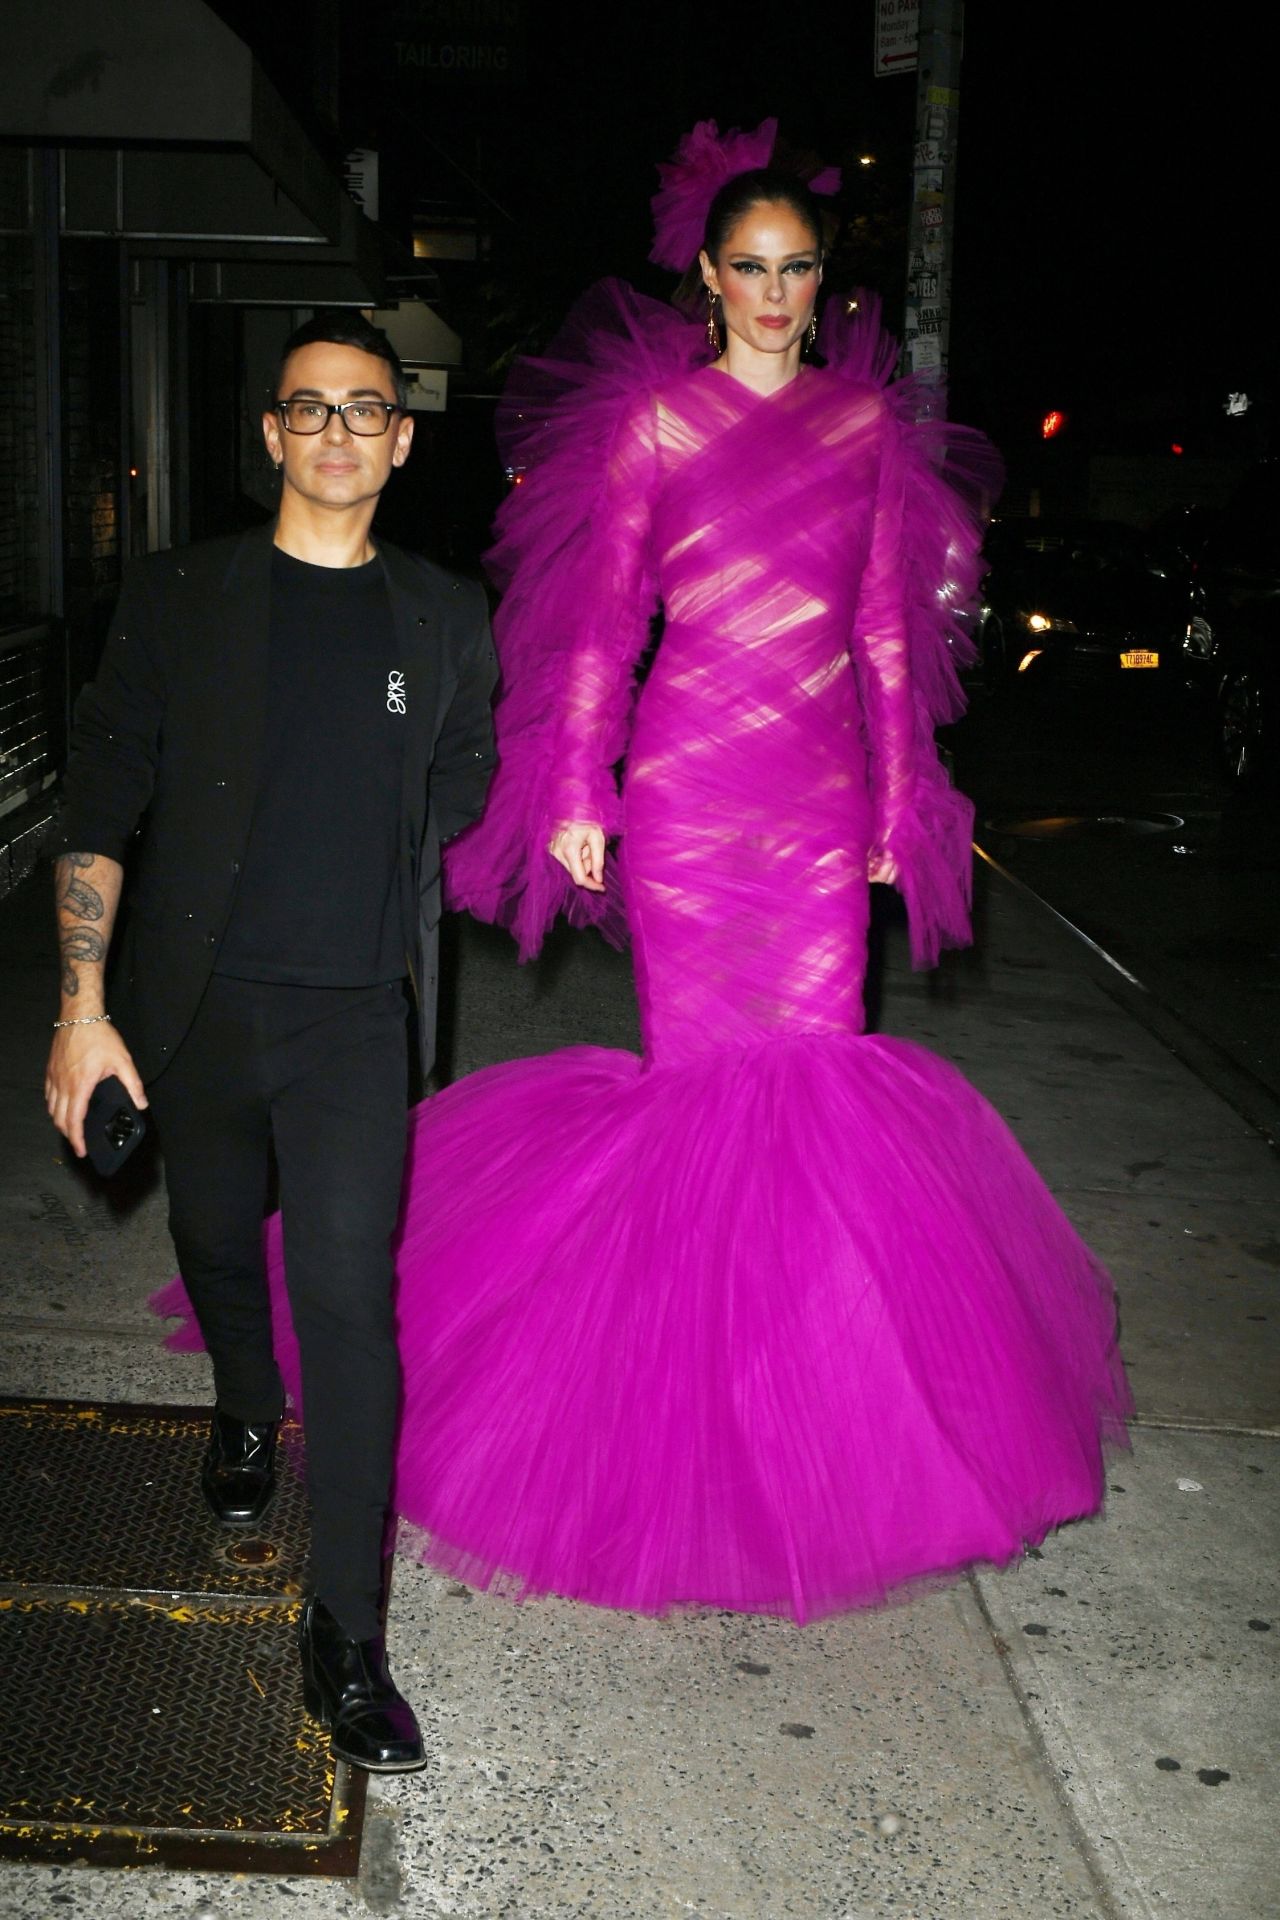 COCO ROCHA AT THE THE MULBERRY BAR FOR A MET GALA AFTER PARTY IN NEW YORK2